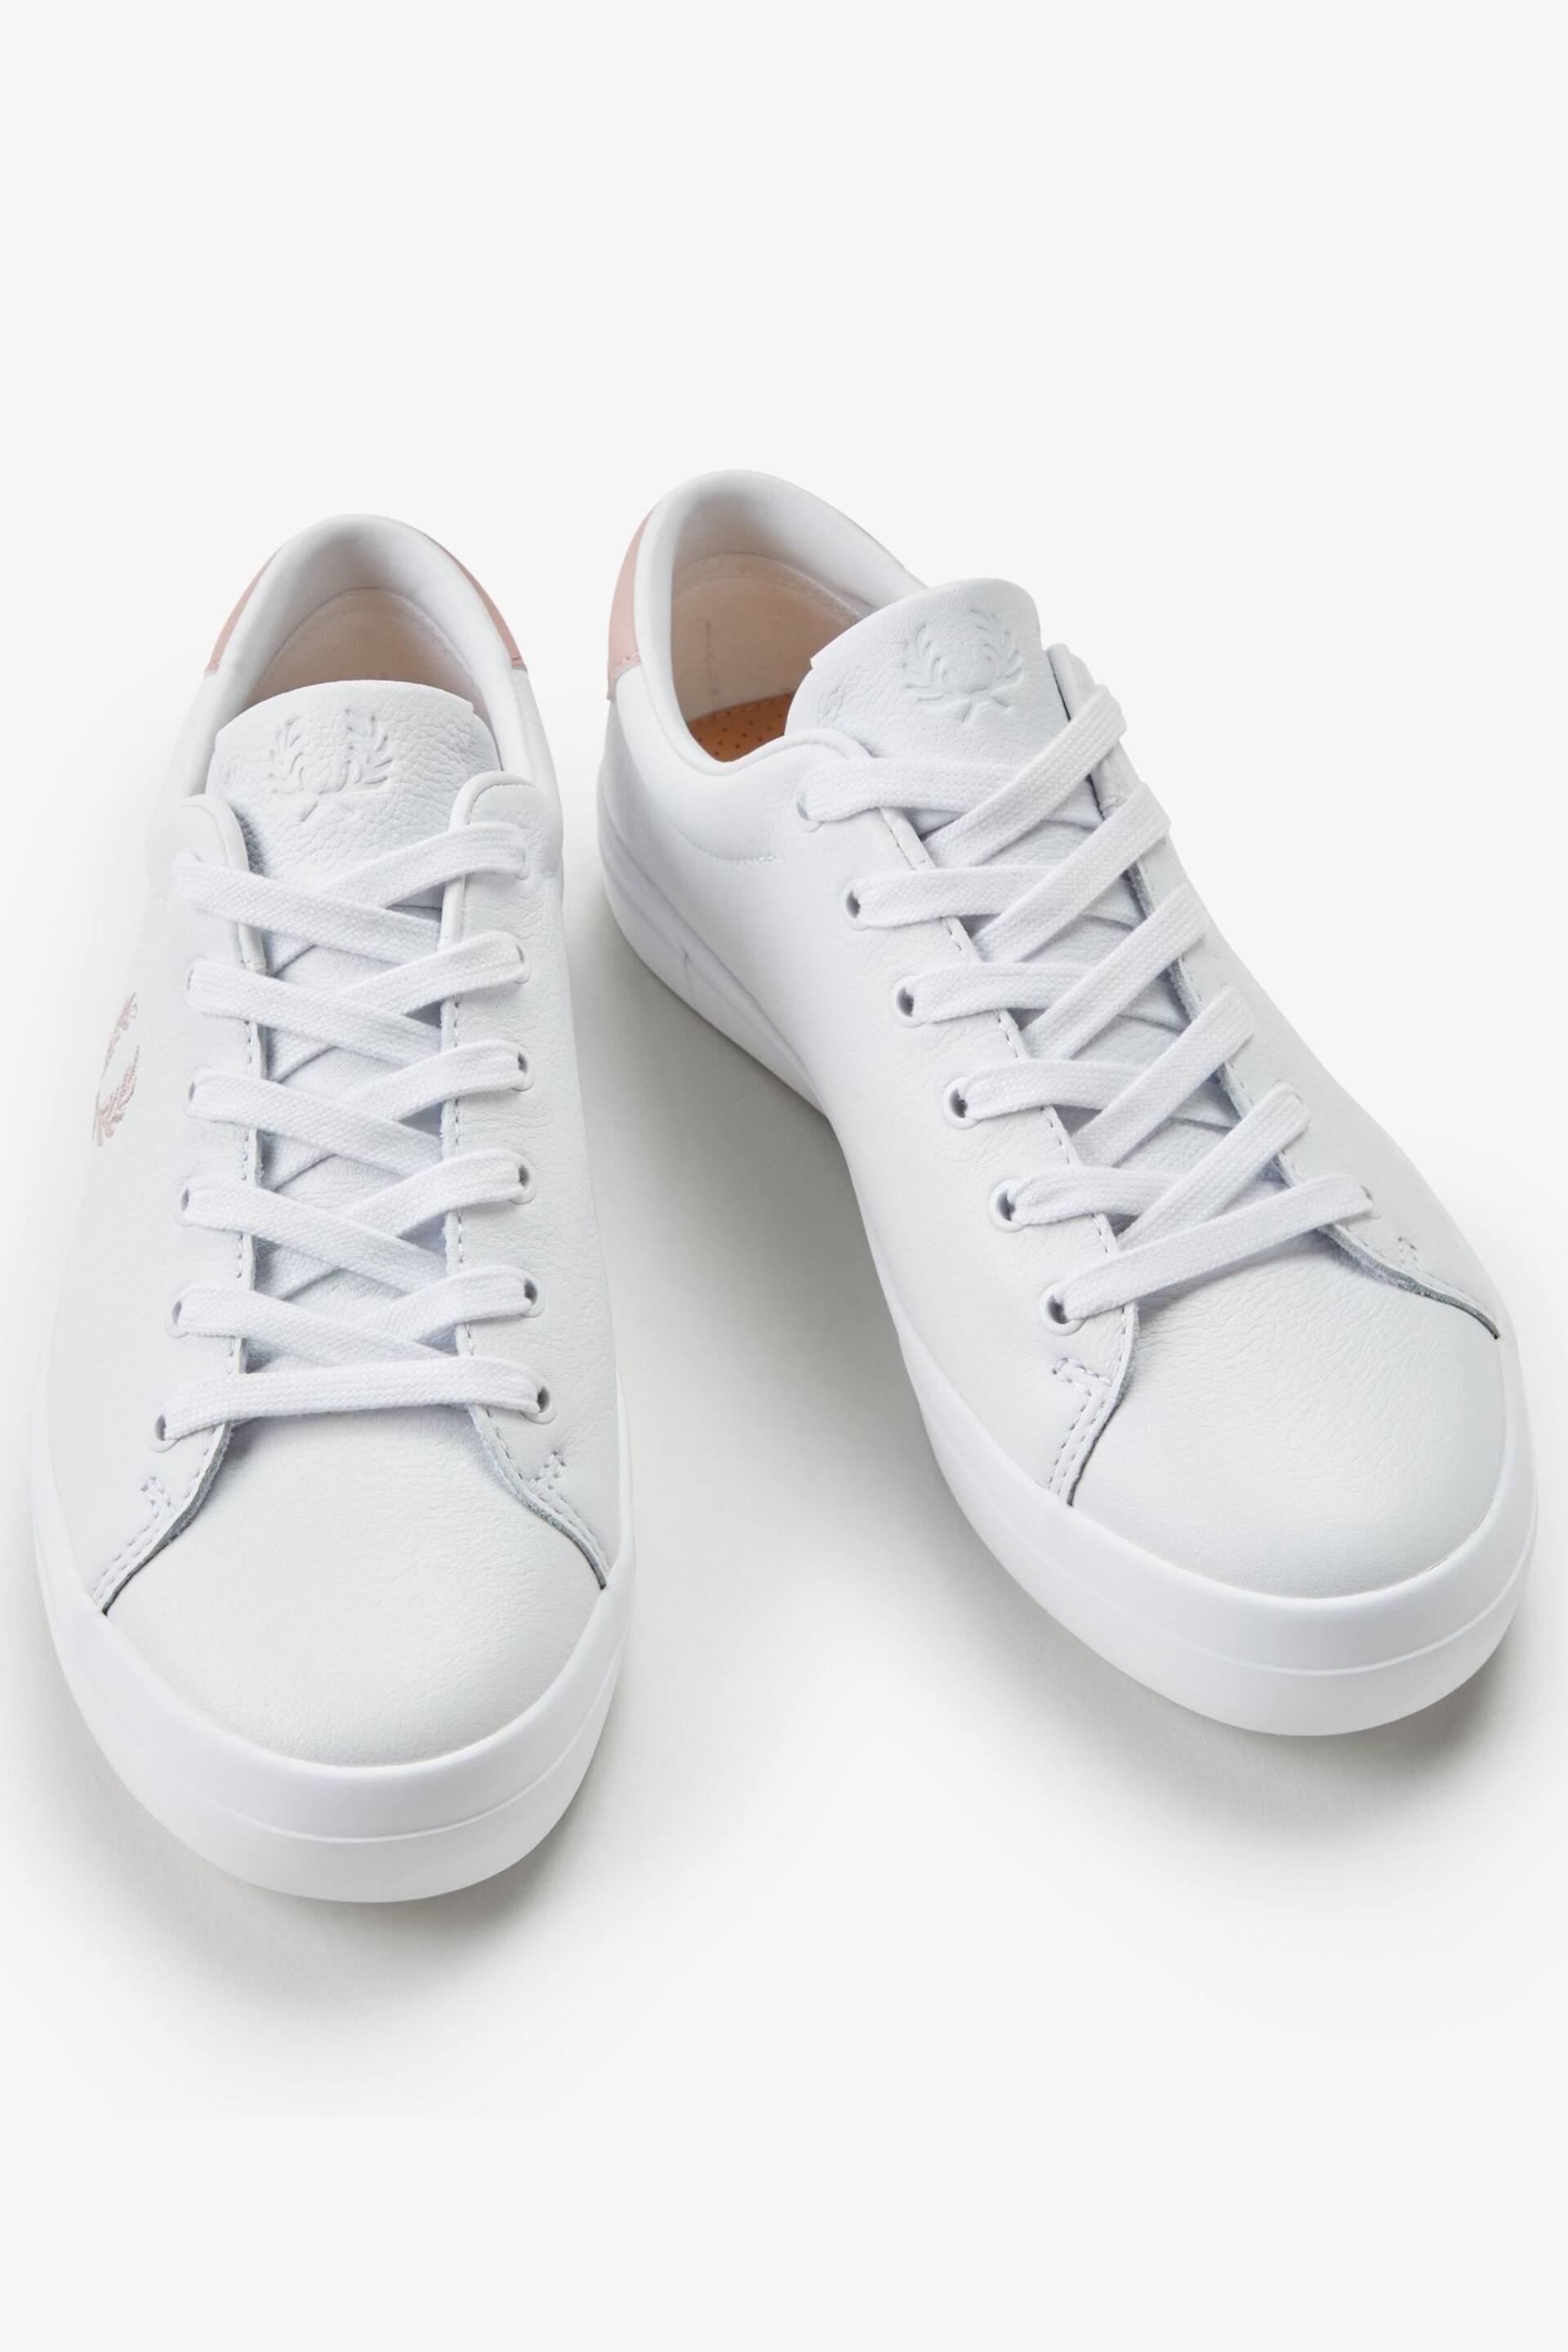 Fred Perry Womens White Lottie Leather Trainers - Image 3 of 5